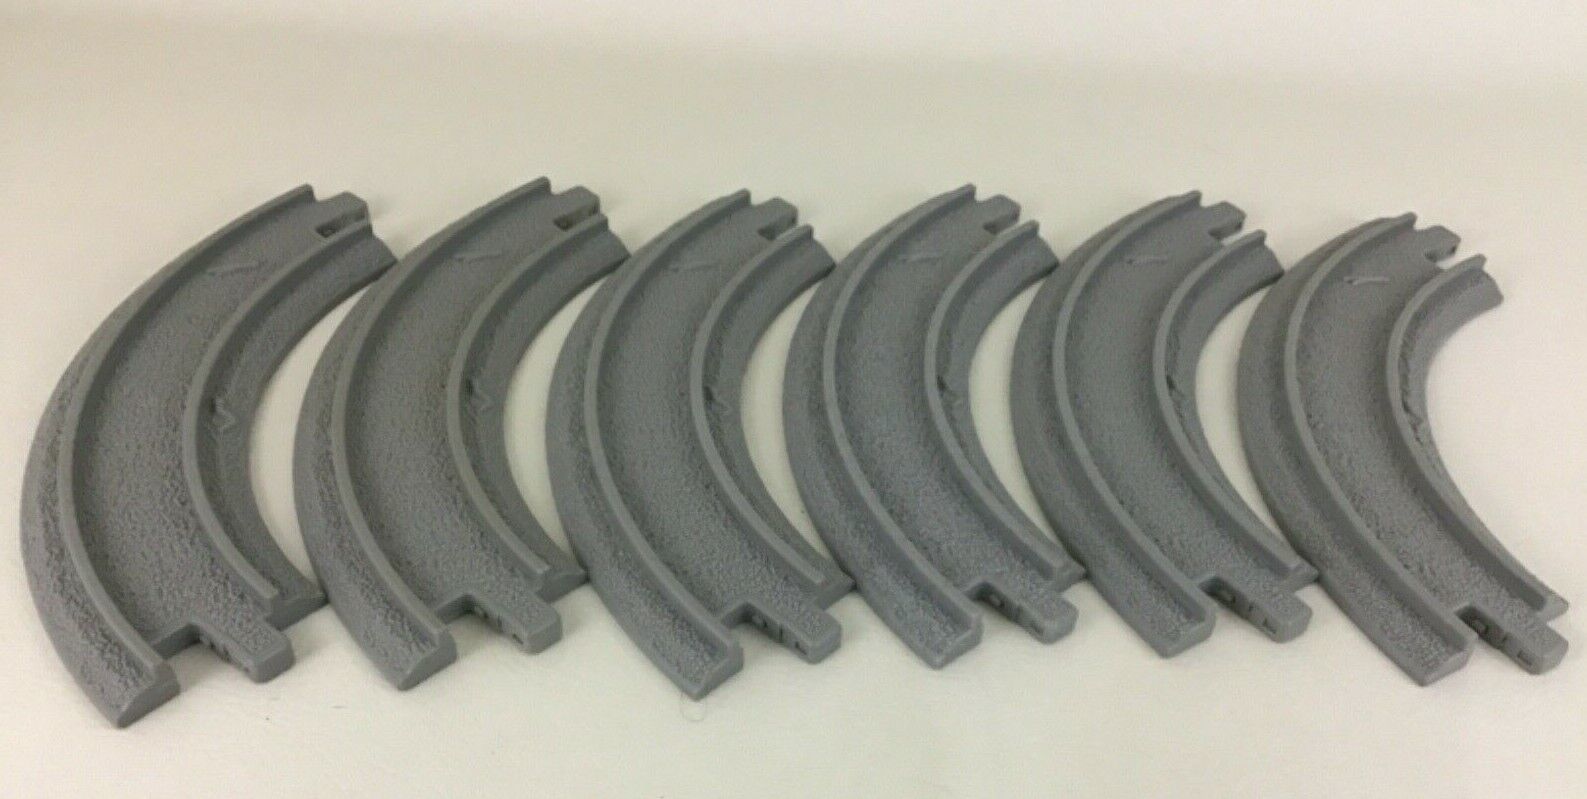 Primary image for GeoTrax Replacement Railroad Track Pieces Grey Gravel Curve 6pc 2003 Mattel D4